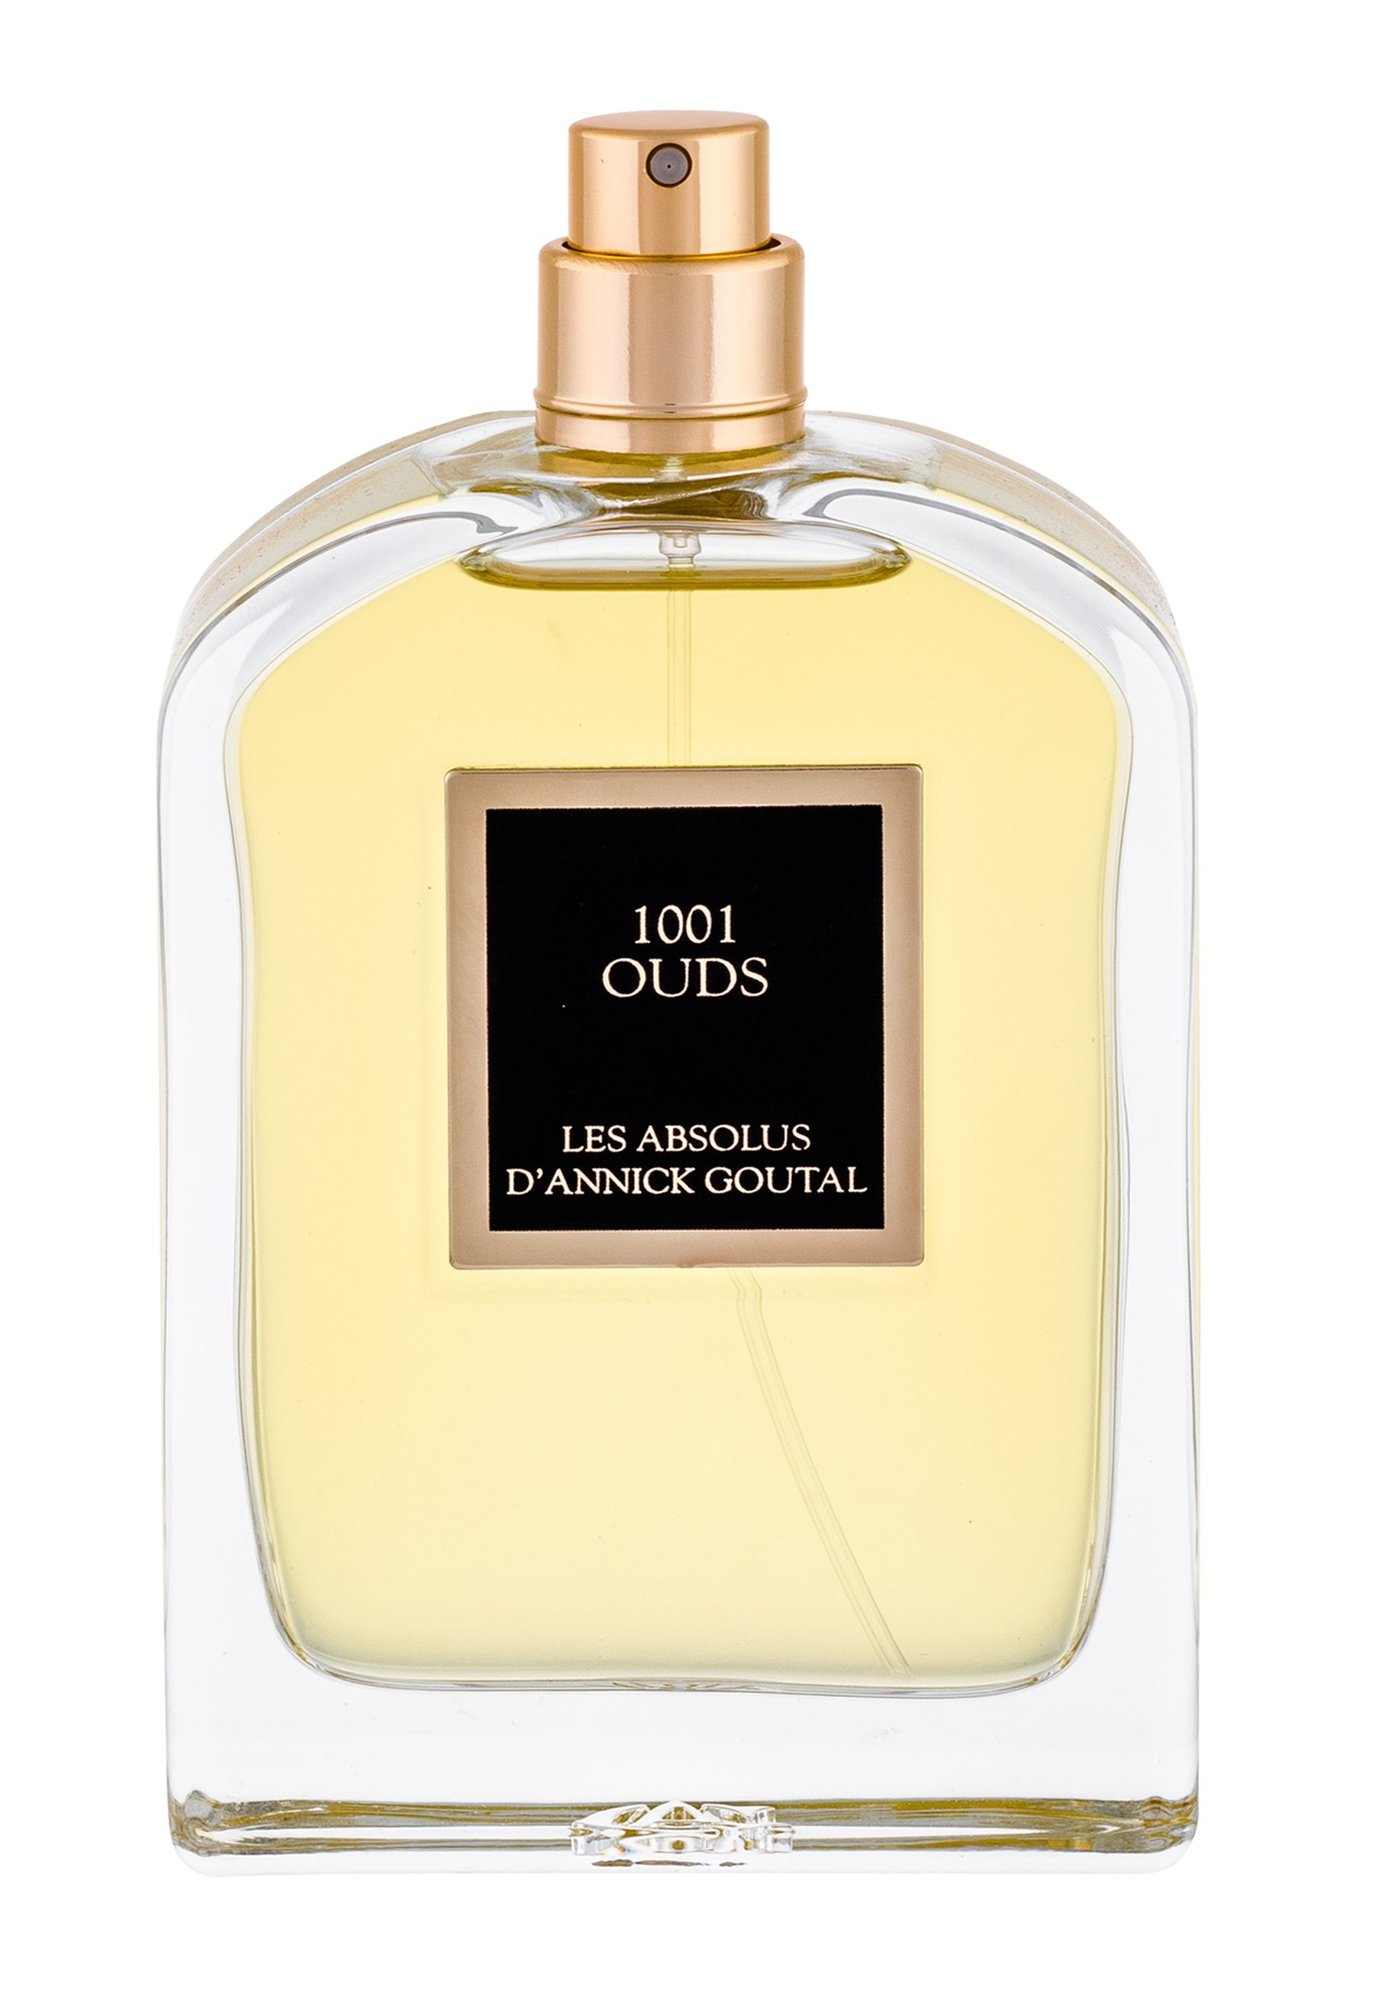 Annick Goutal 1001 OUDS